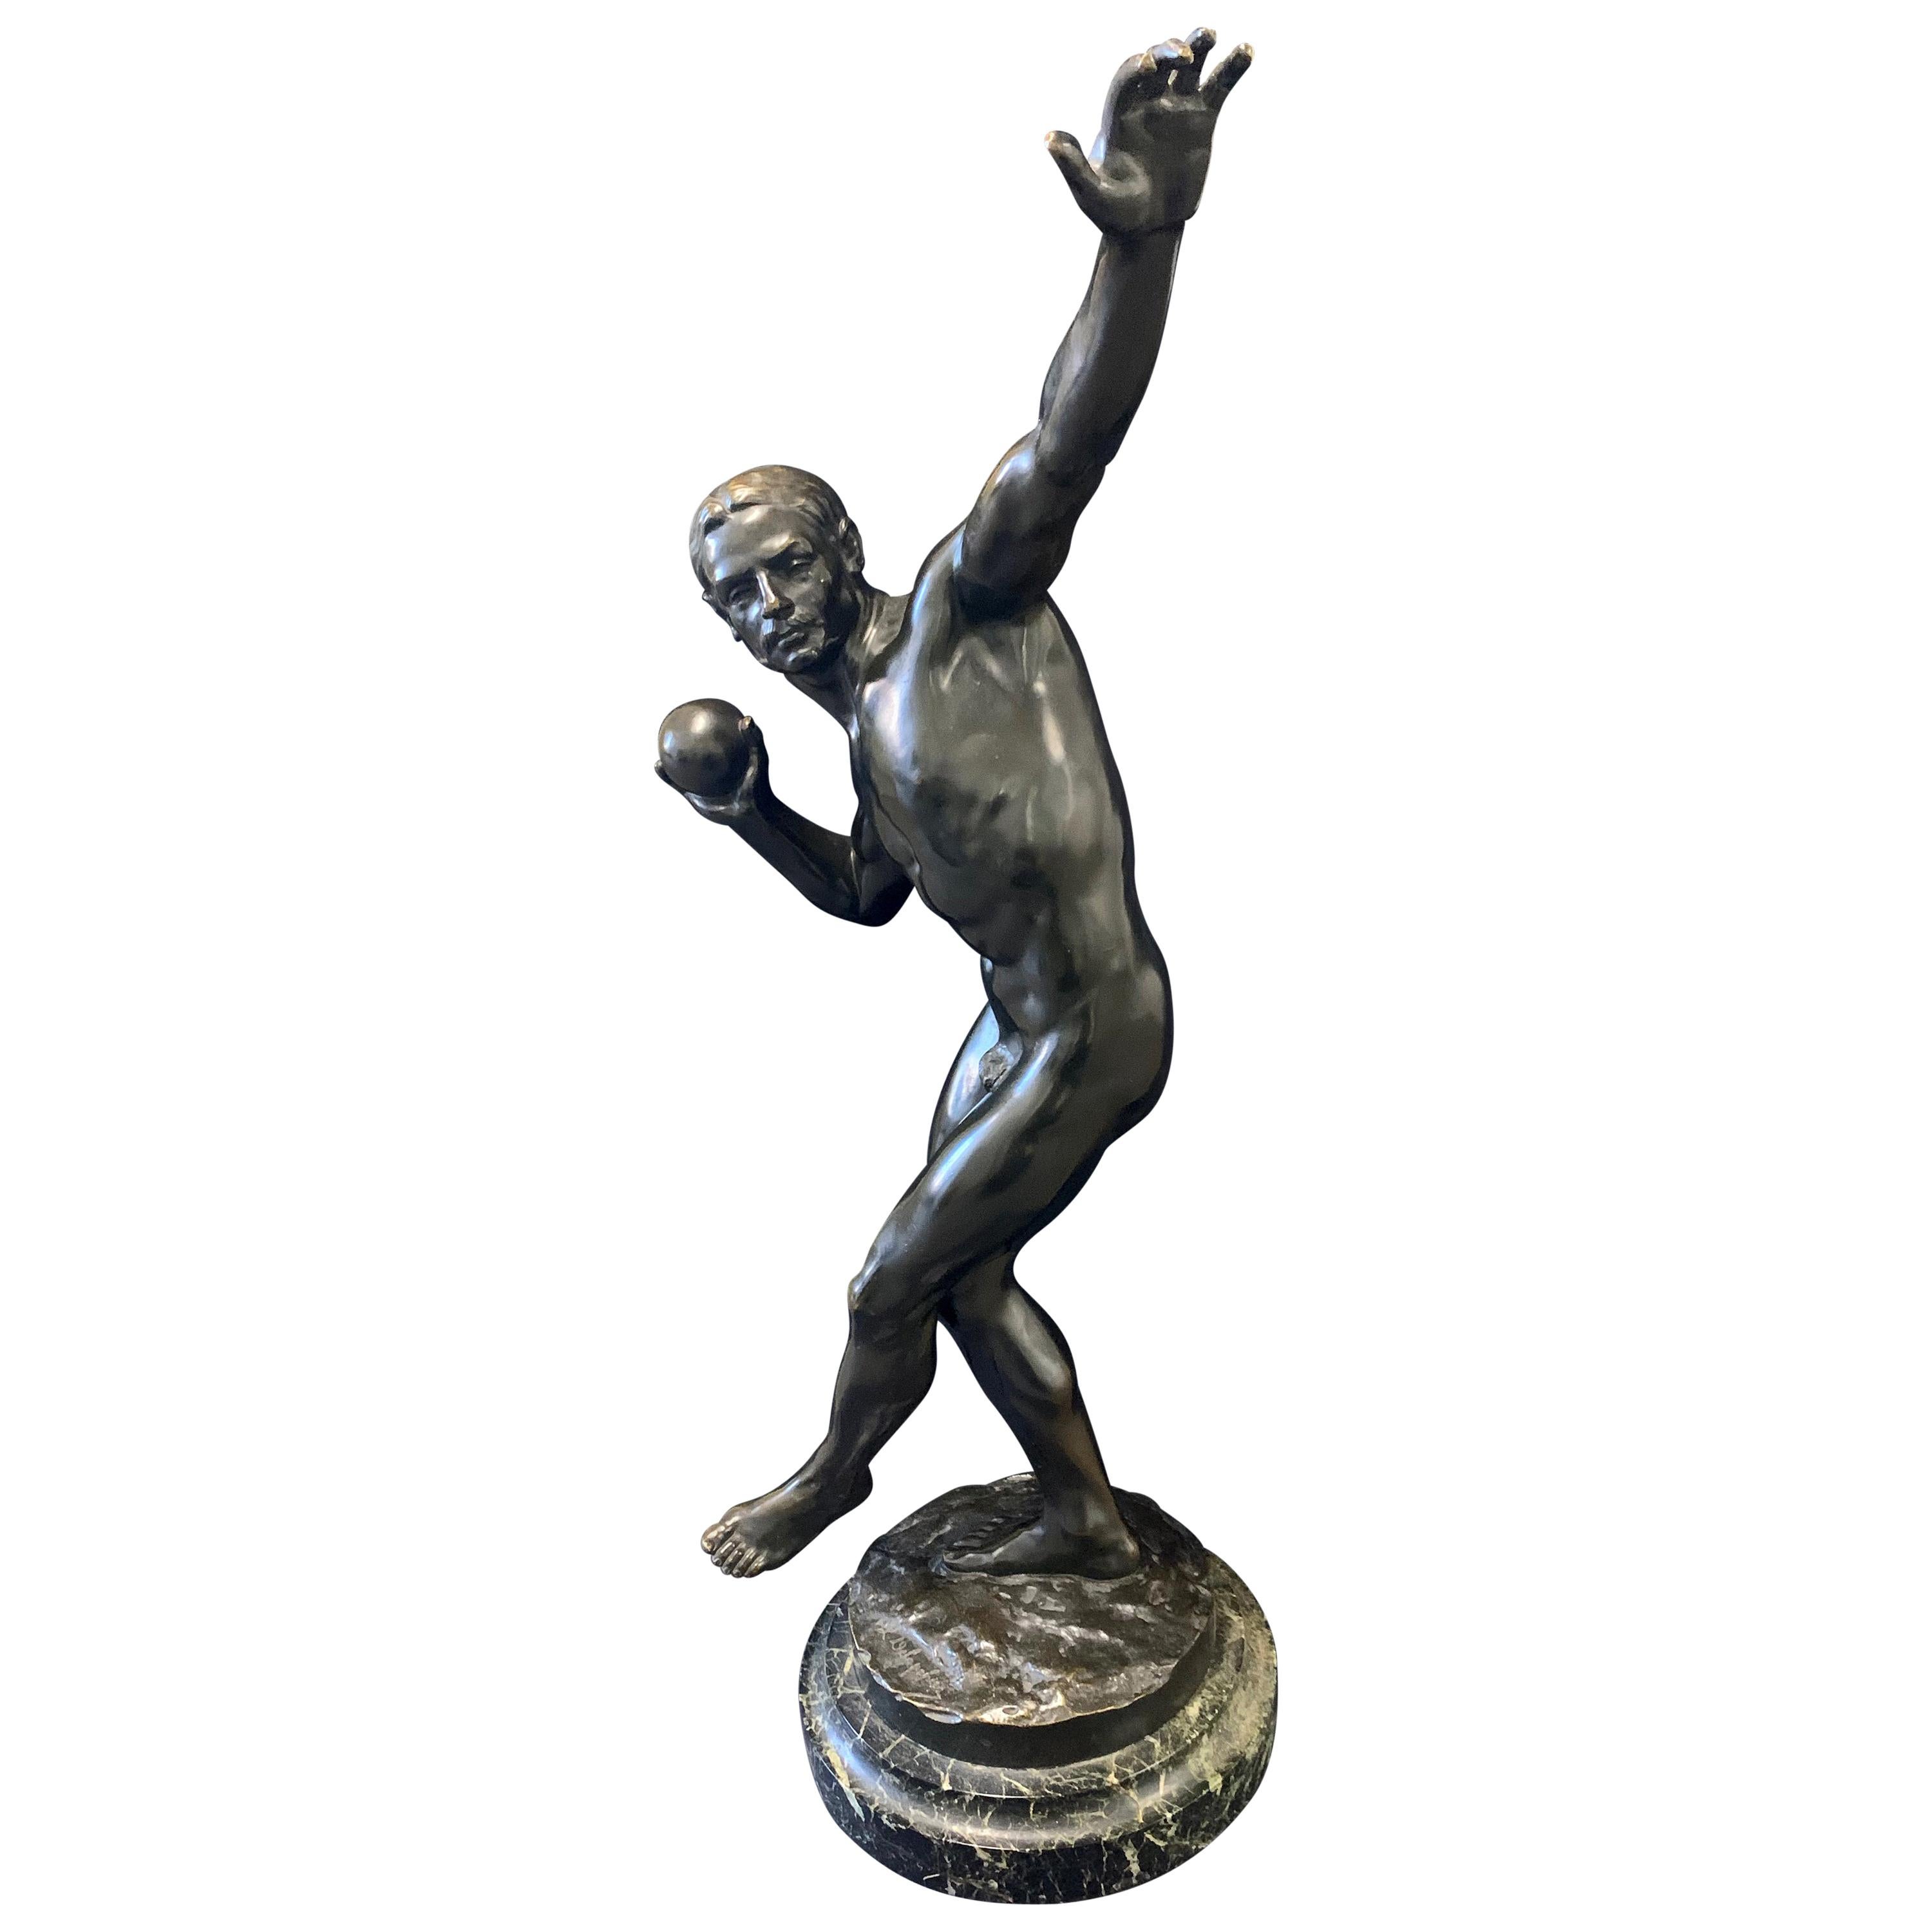 "Shotputter," Large Bronze Sculpture of Nude Male Athlete, Exquisitely Sculpted